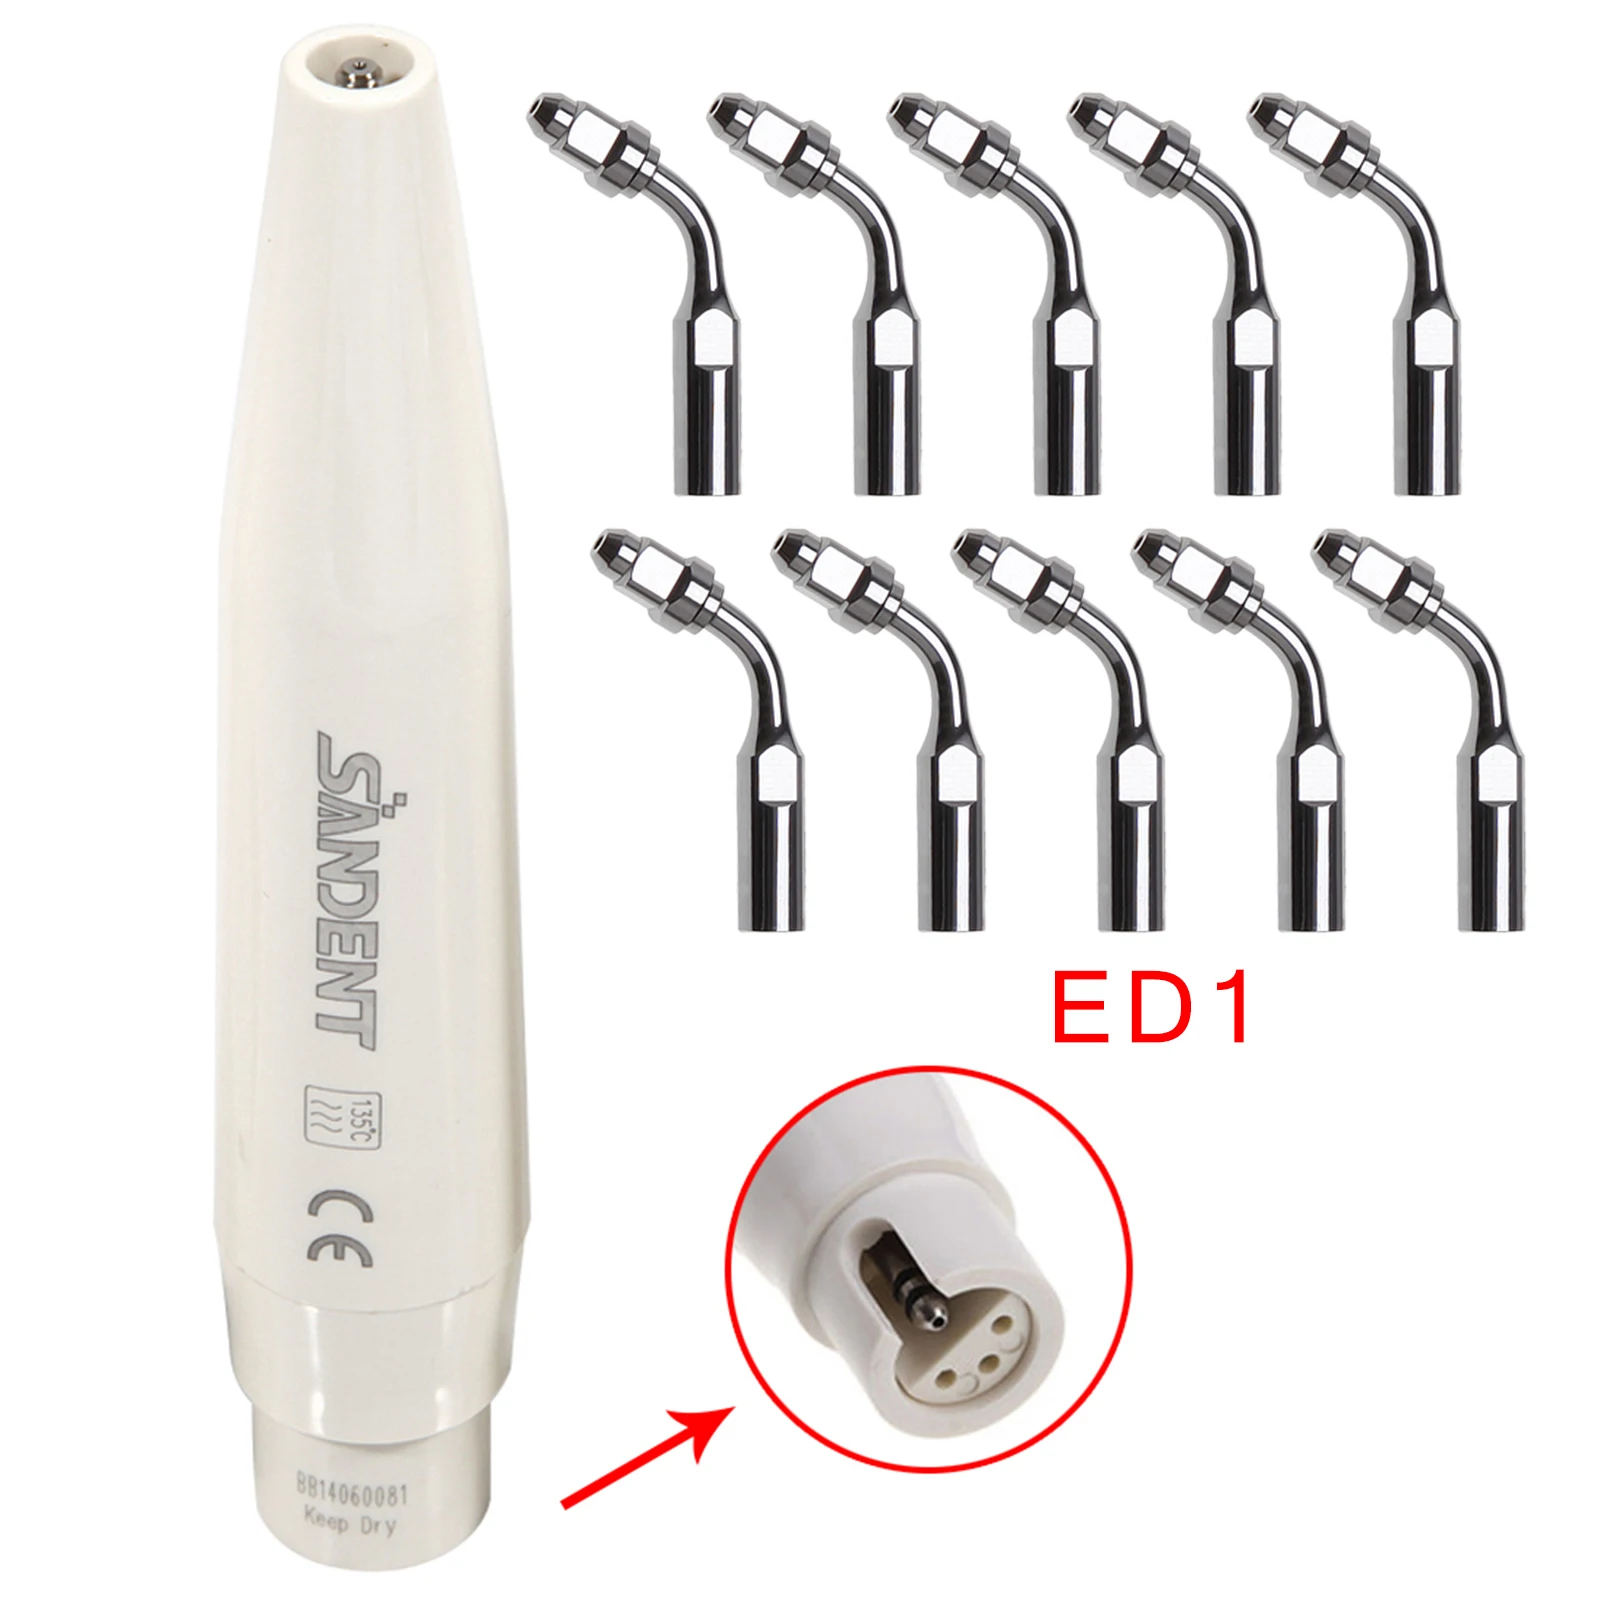 

Dental Ultrasonic Electric Piezo Scaler Deluxe Scaling Handpiece +Endo Scaling Tips ED1 Fit SATELEC DTE